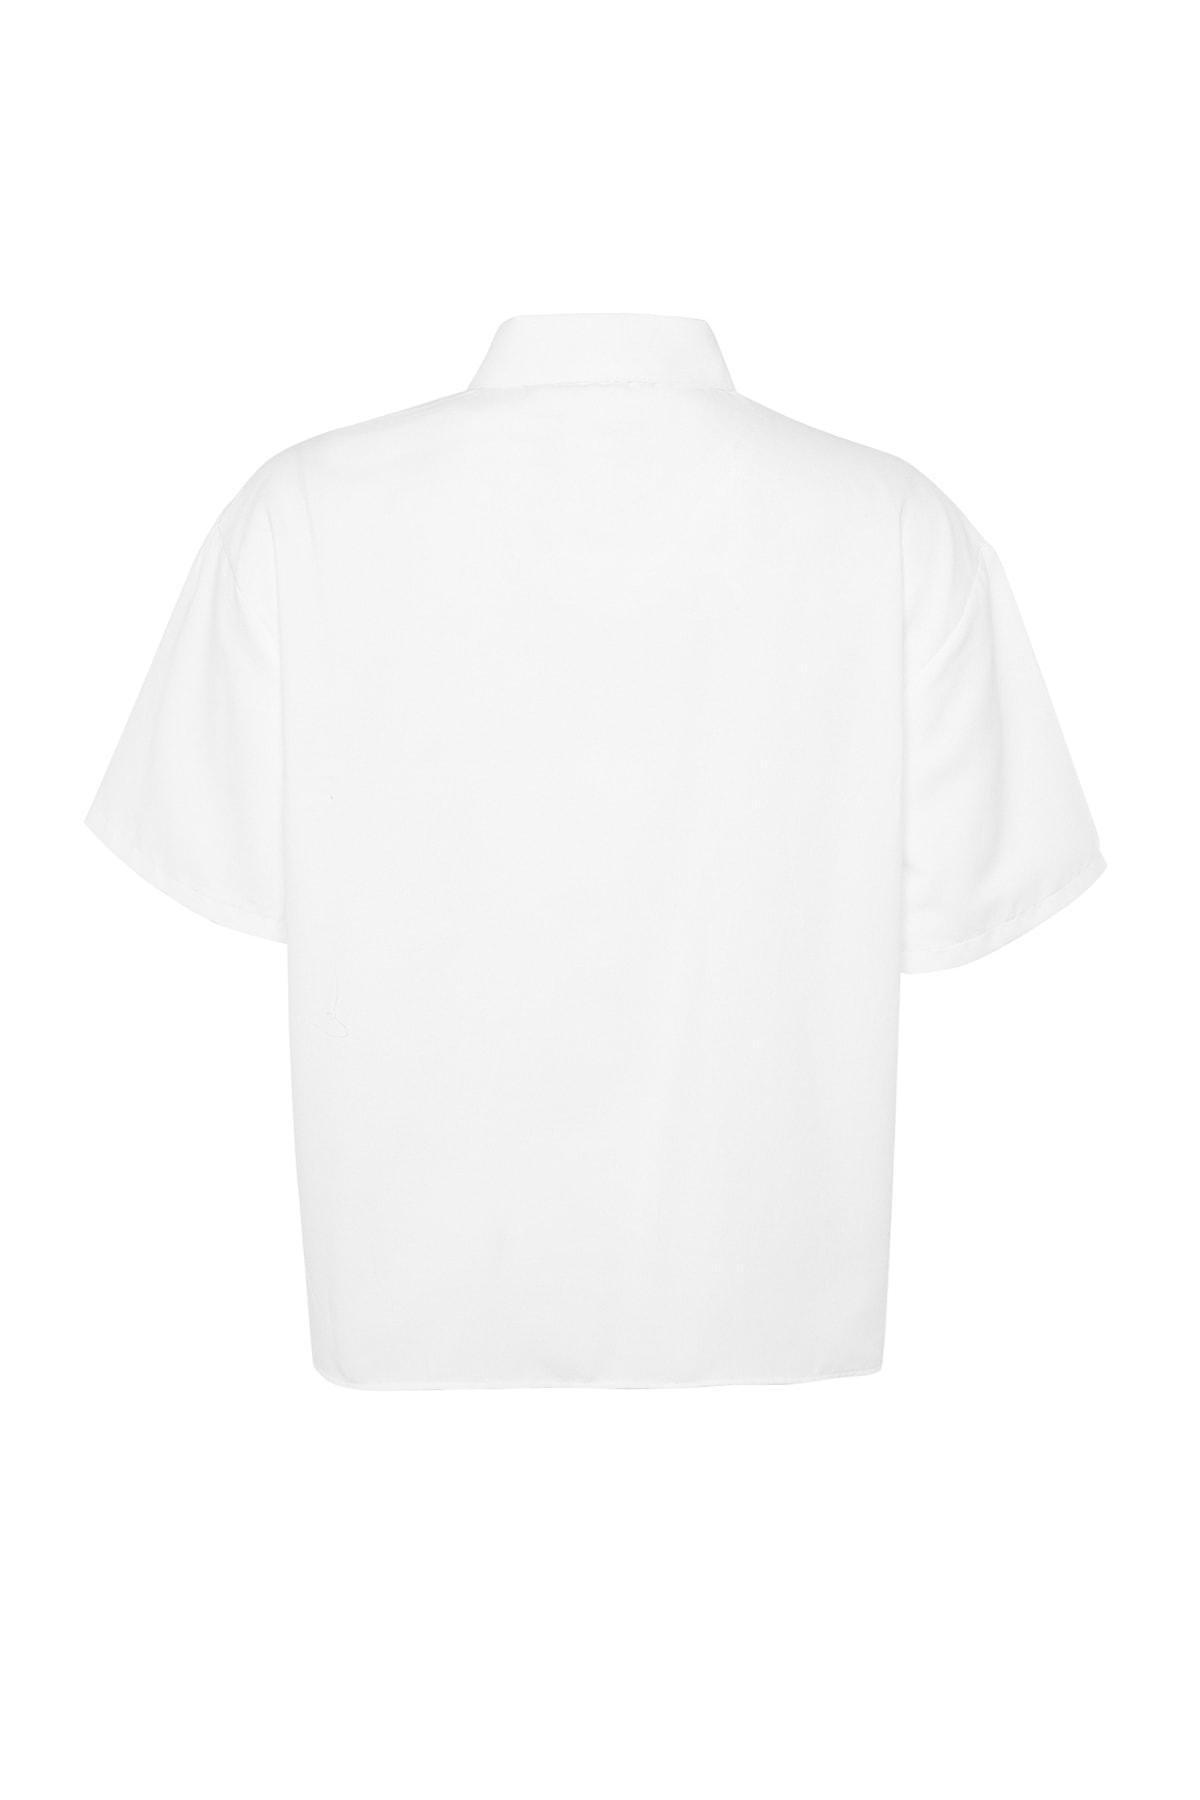 Trendyol - White Relaxed Plus Size Shirt